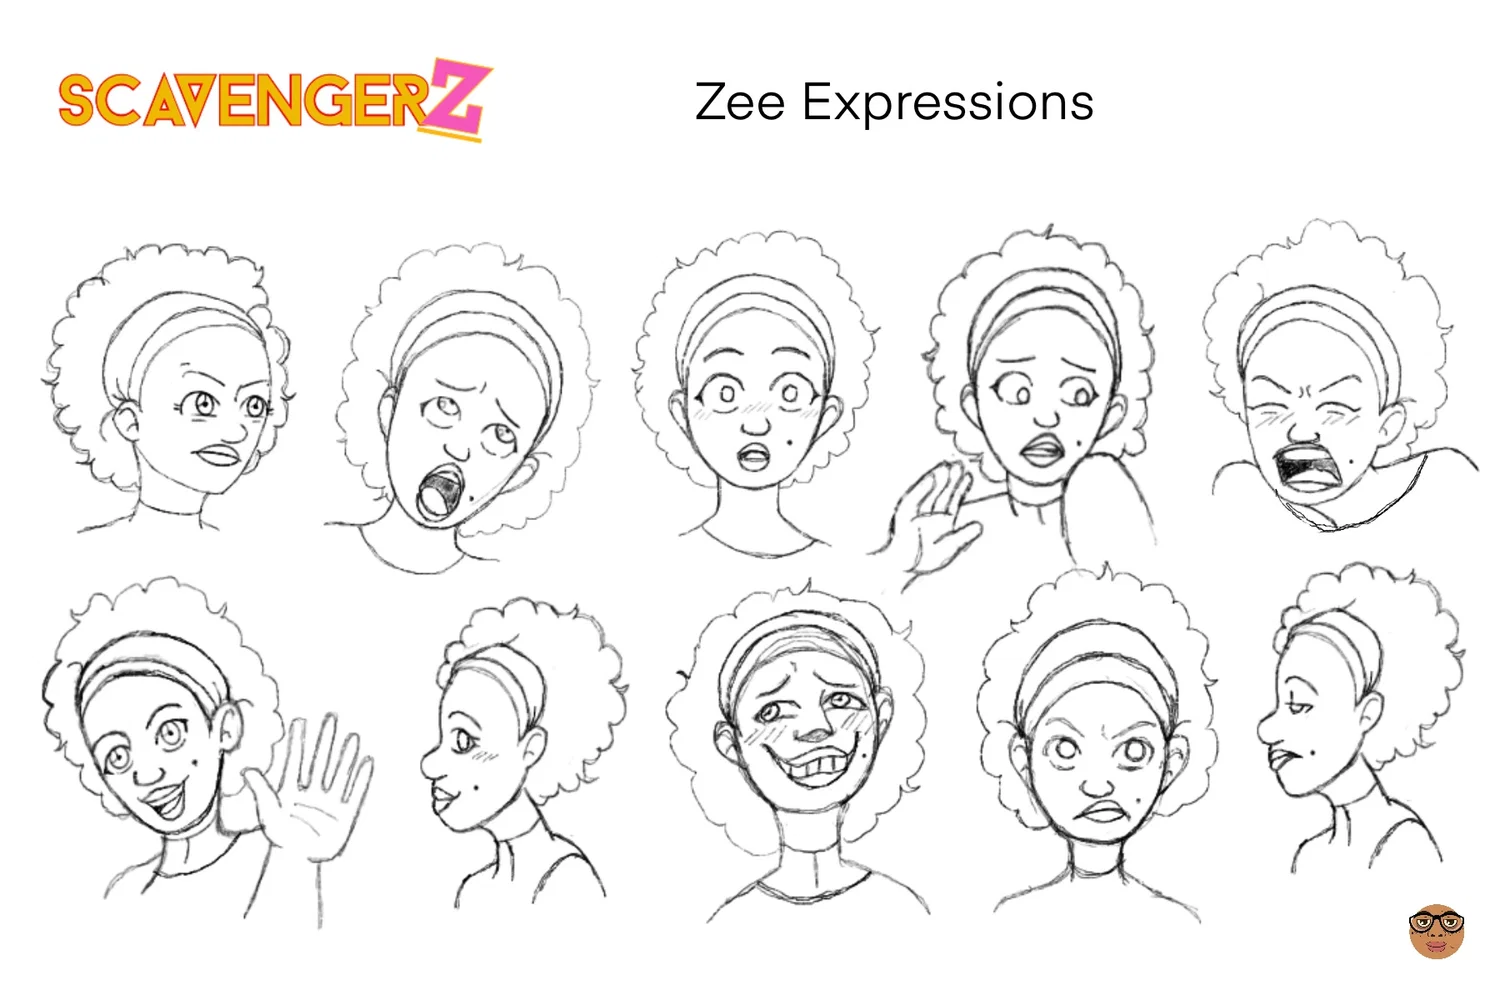 Ten expressions of the character Zee, ranging from happy, angry, shock, frustration and embarrassed 